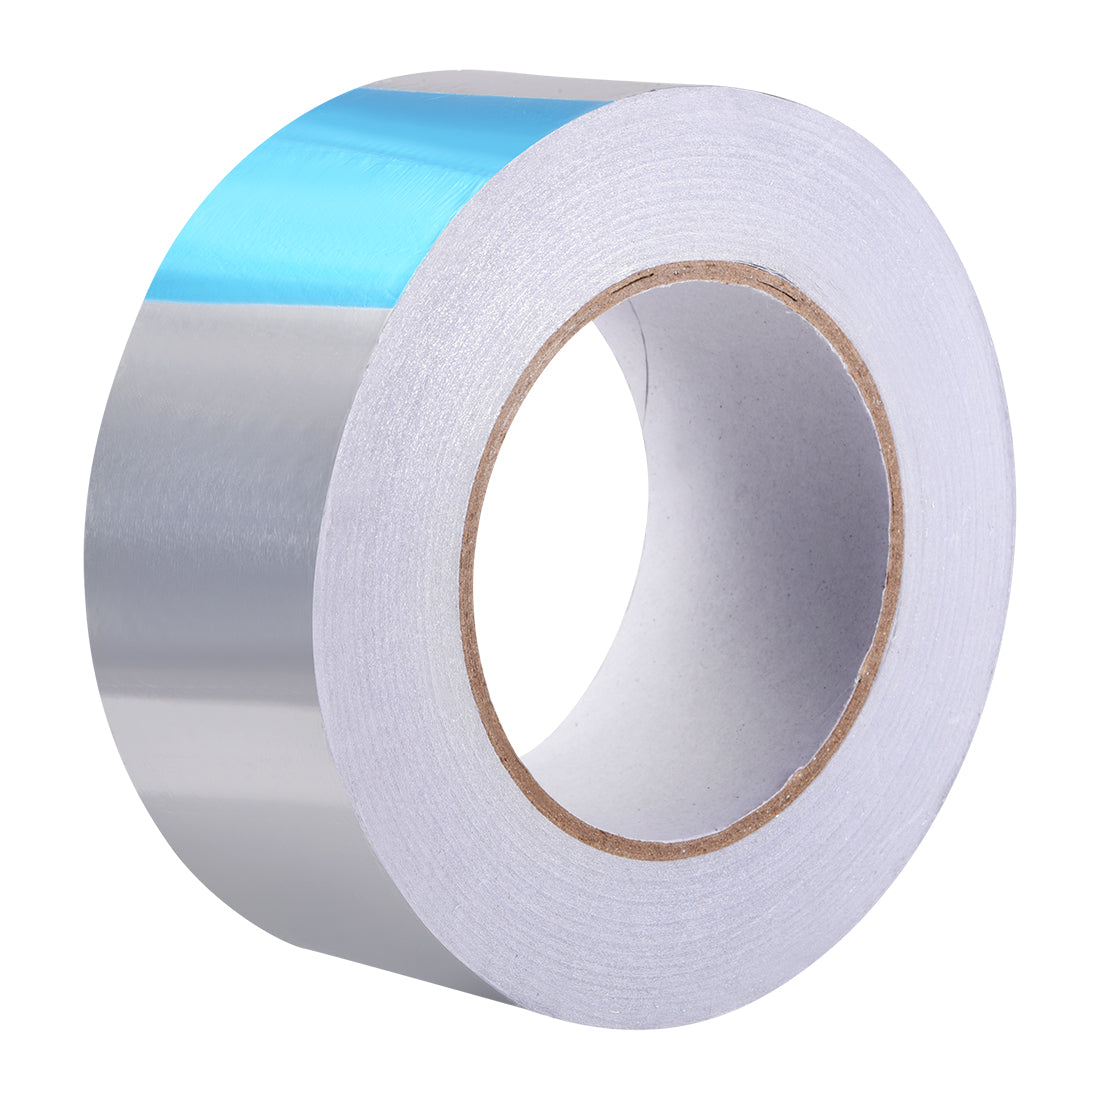 uxcell Uxcell Heat Resistant Tape - High Temperature Heat Transfer Tape Aluminum Foil Adhesive Tape 50mm x 50m(164ft)